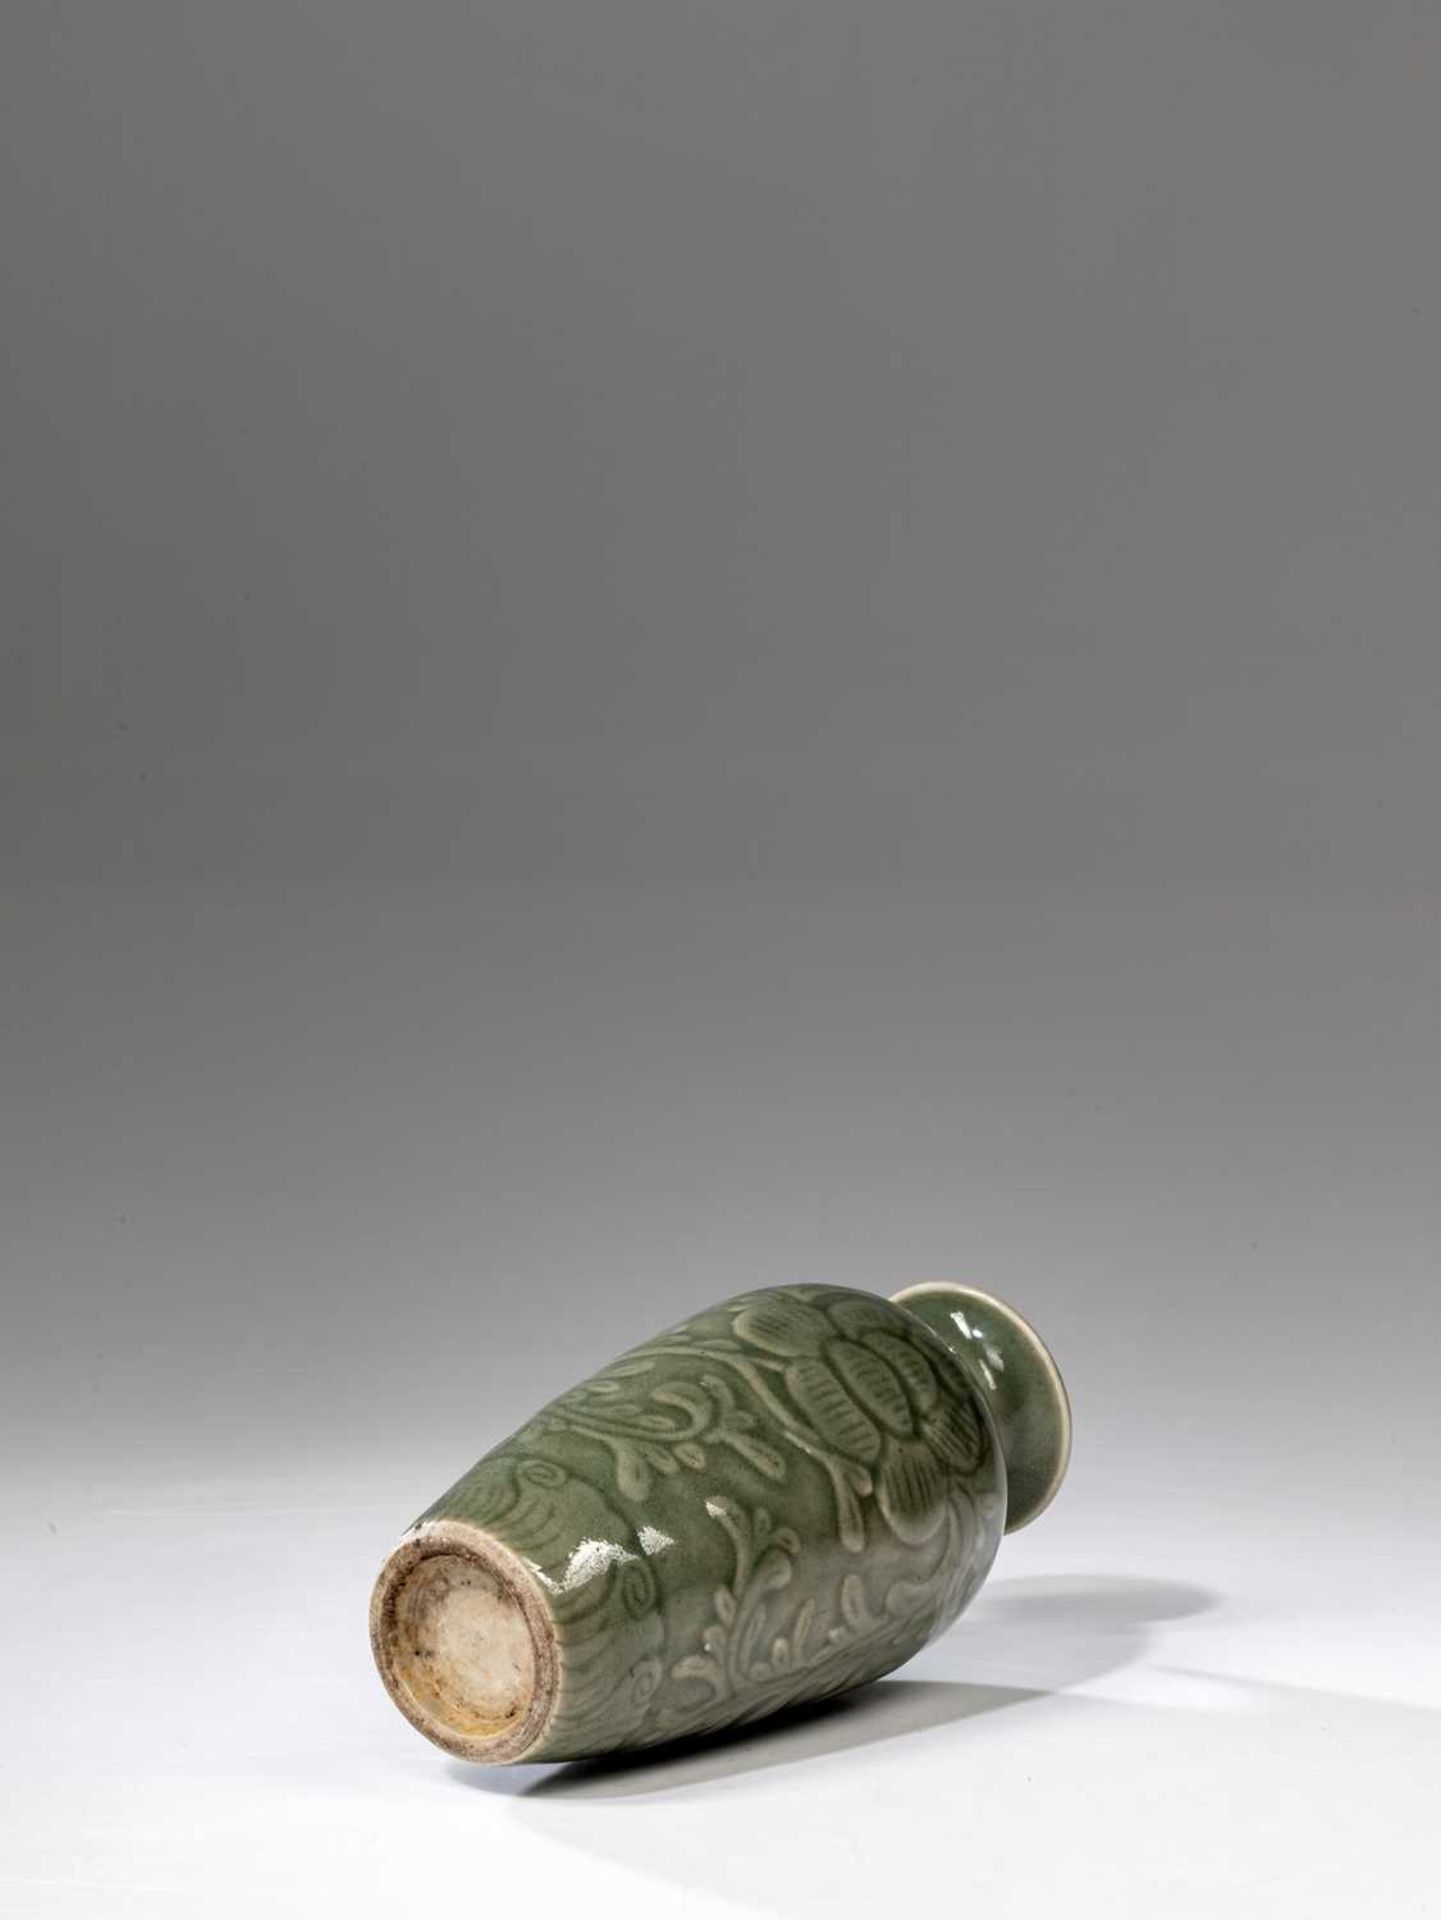 (R) SMALL CELADON VASE - Image 5 of 6